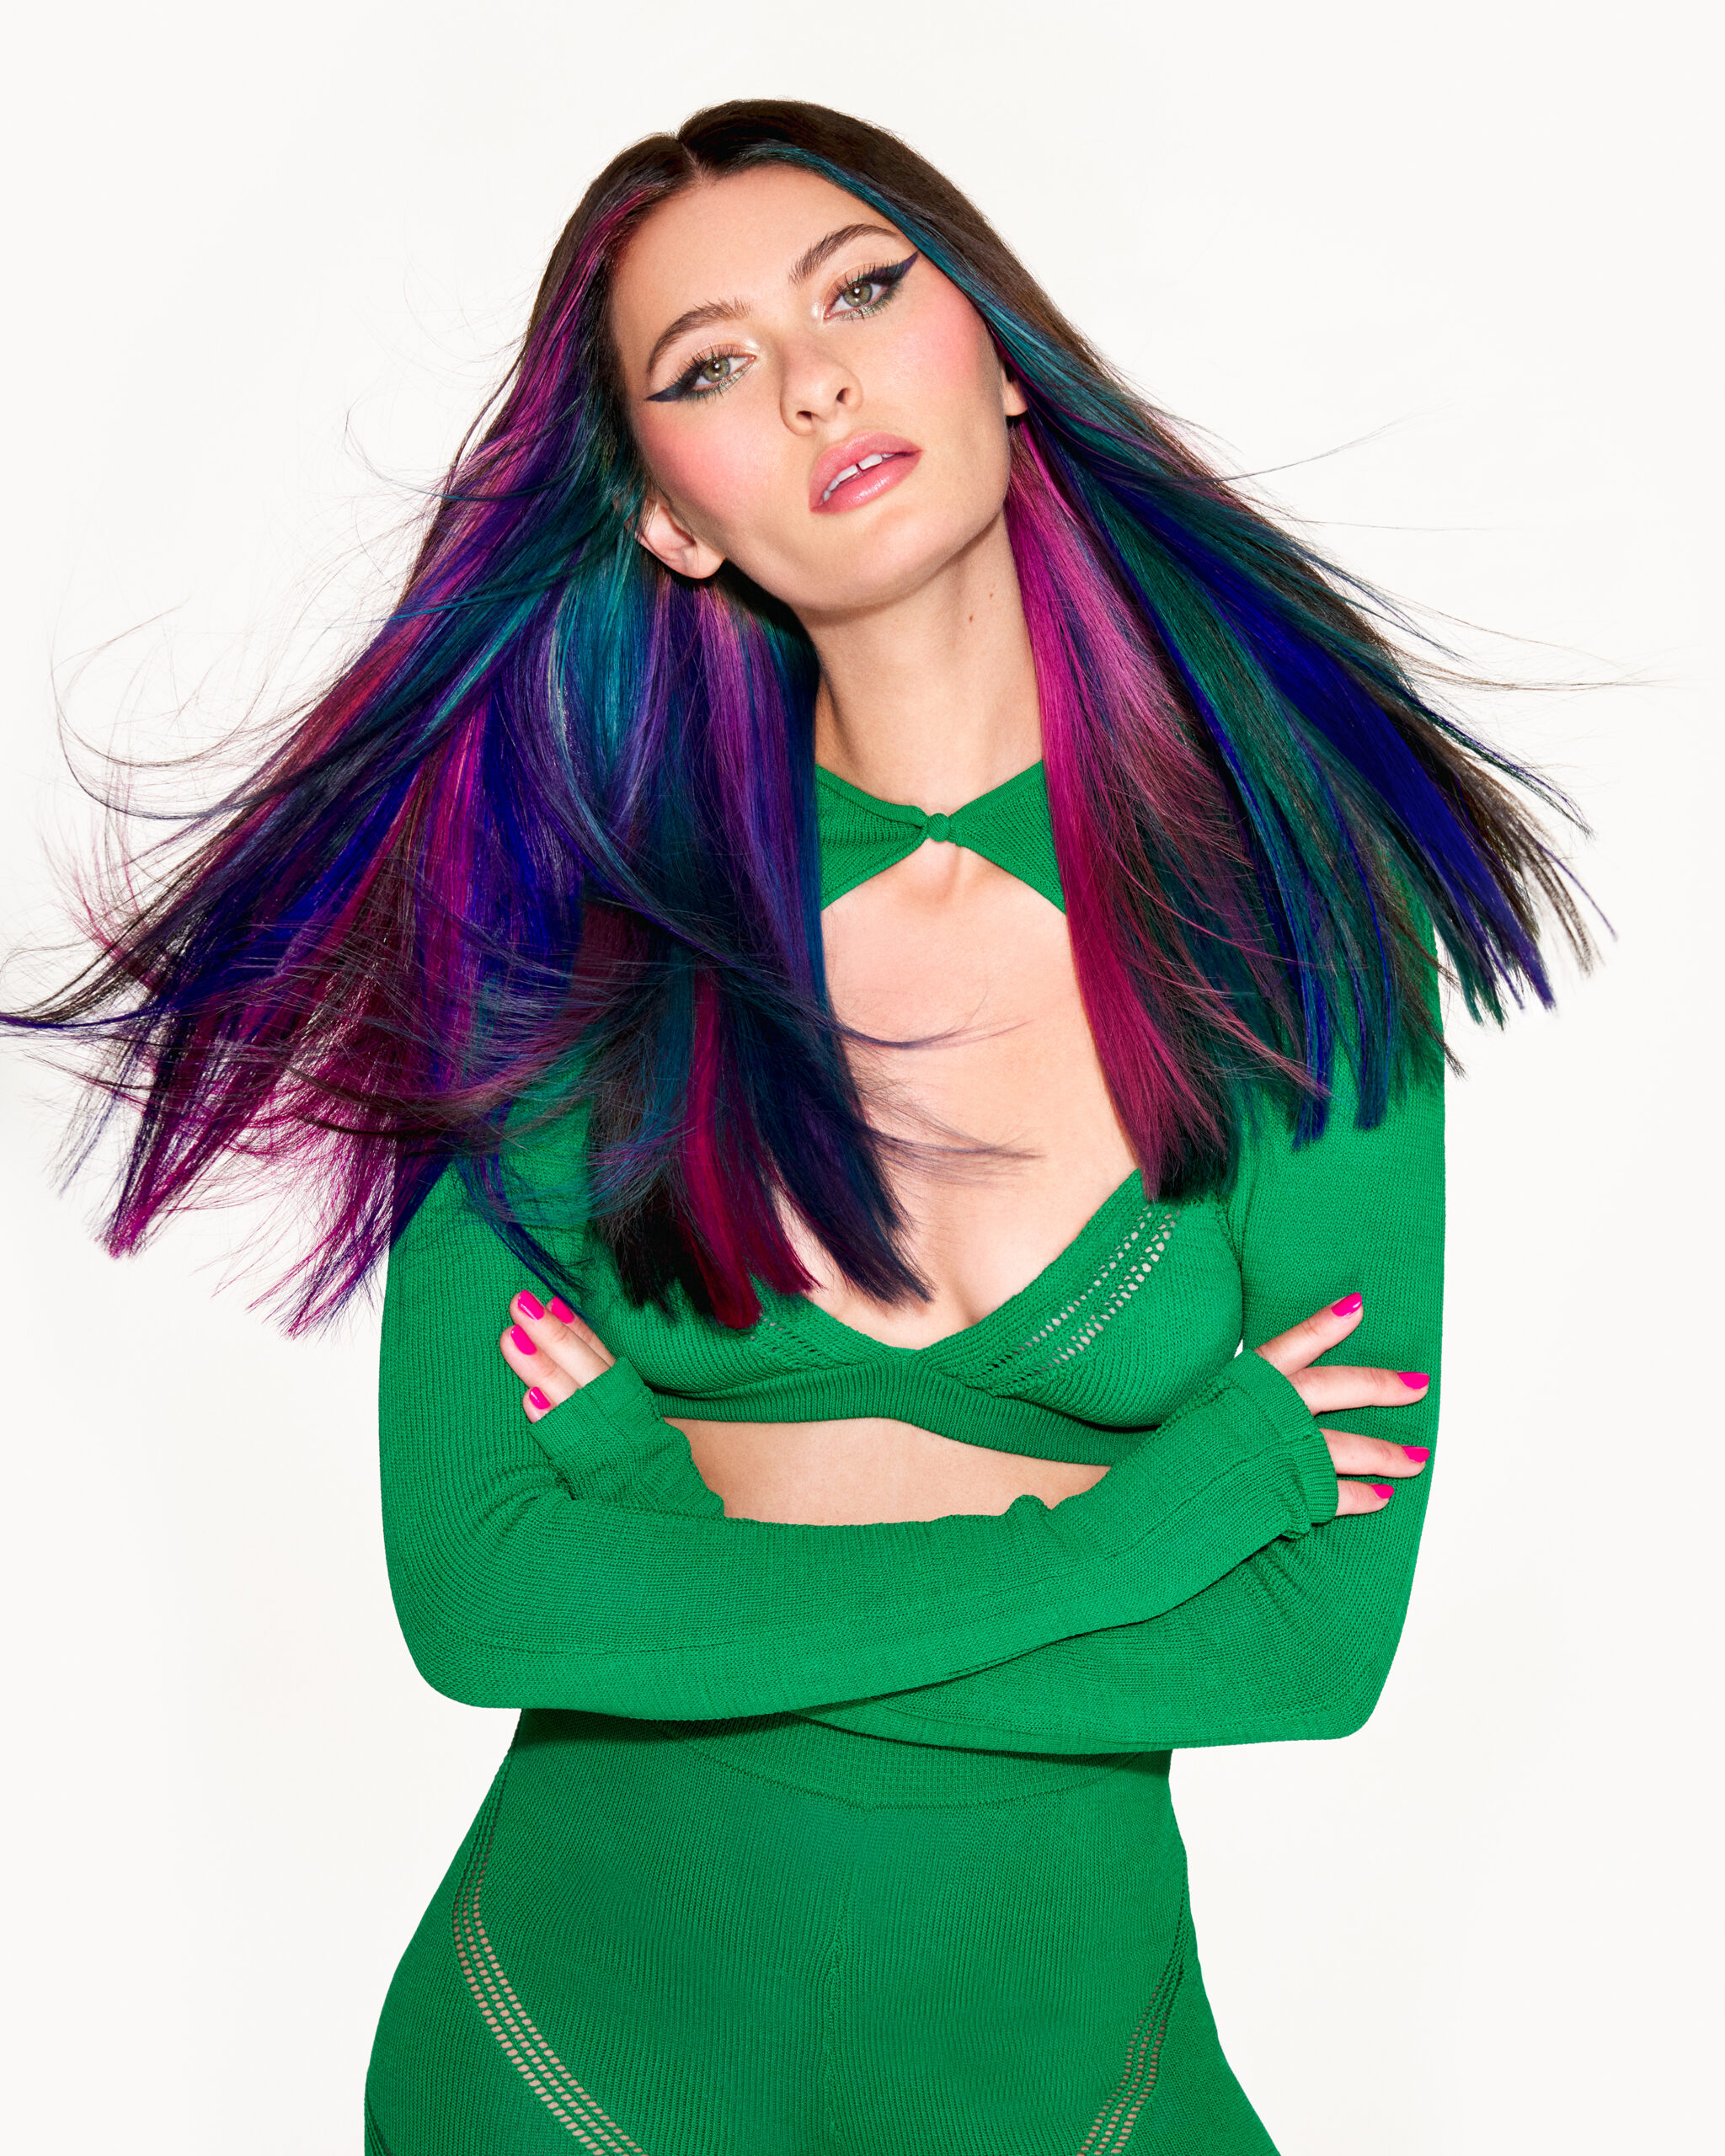 Image of model with purple, green and pink long hair wearing a green dress